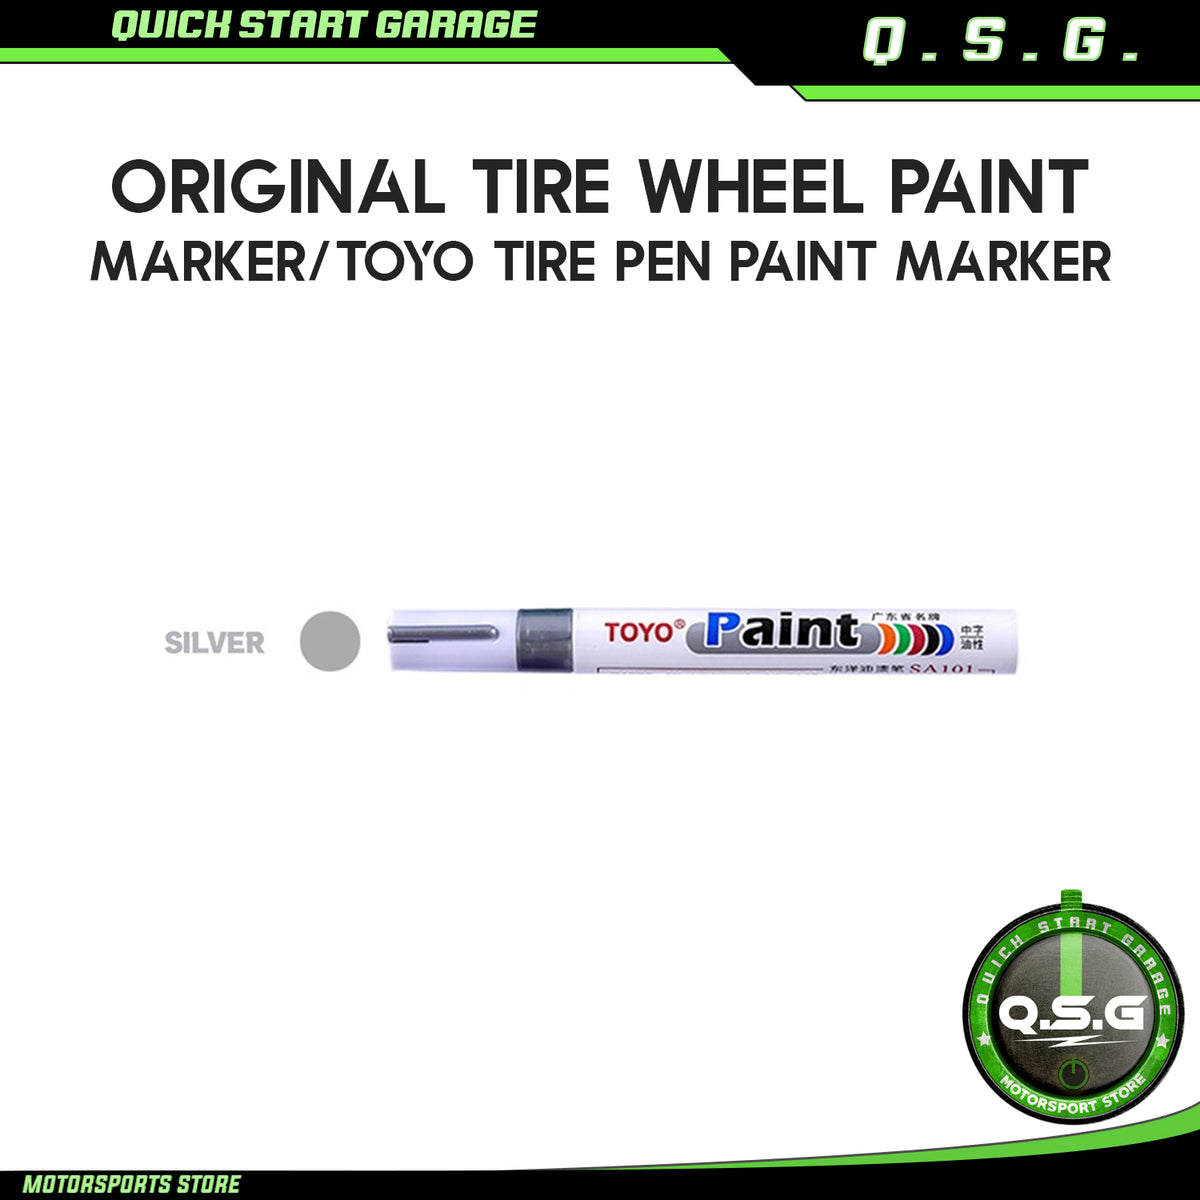 How To Use Tire Pen! Using the correct paint pen to achieve